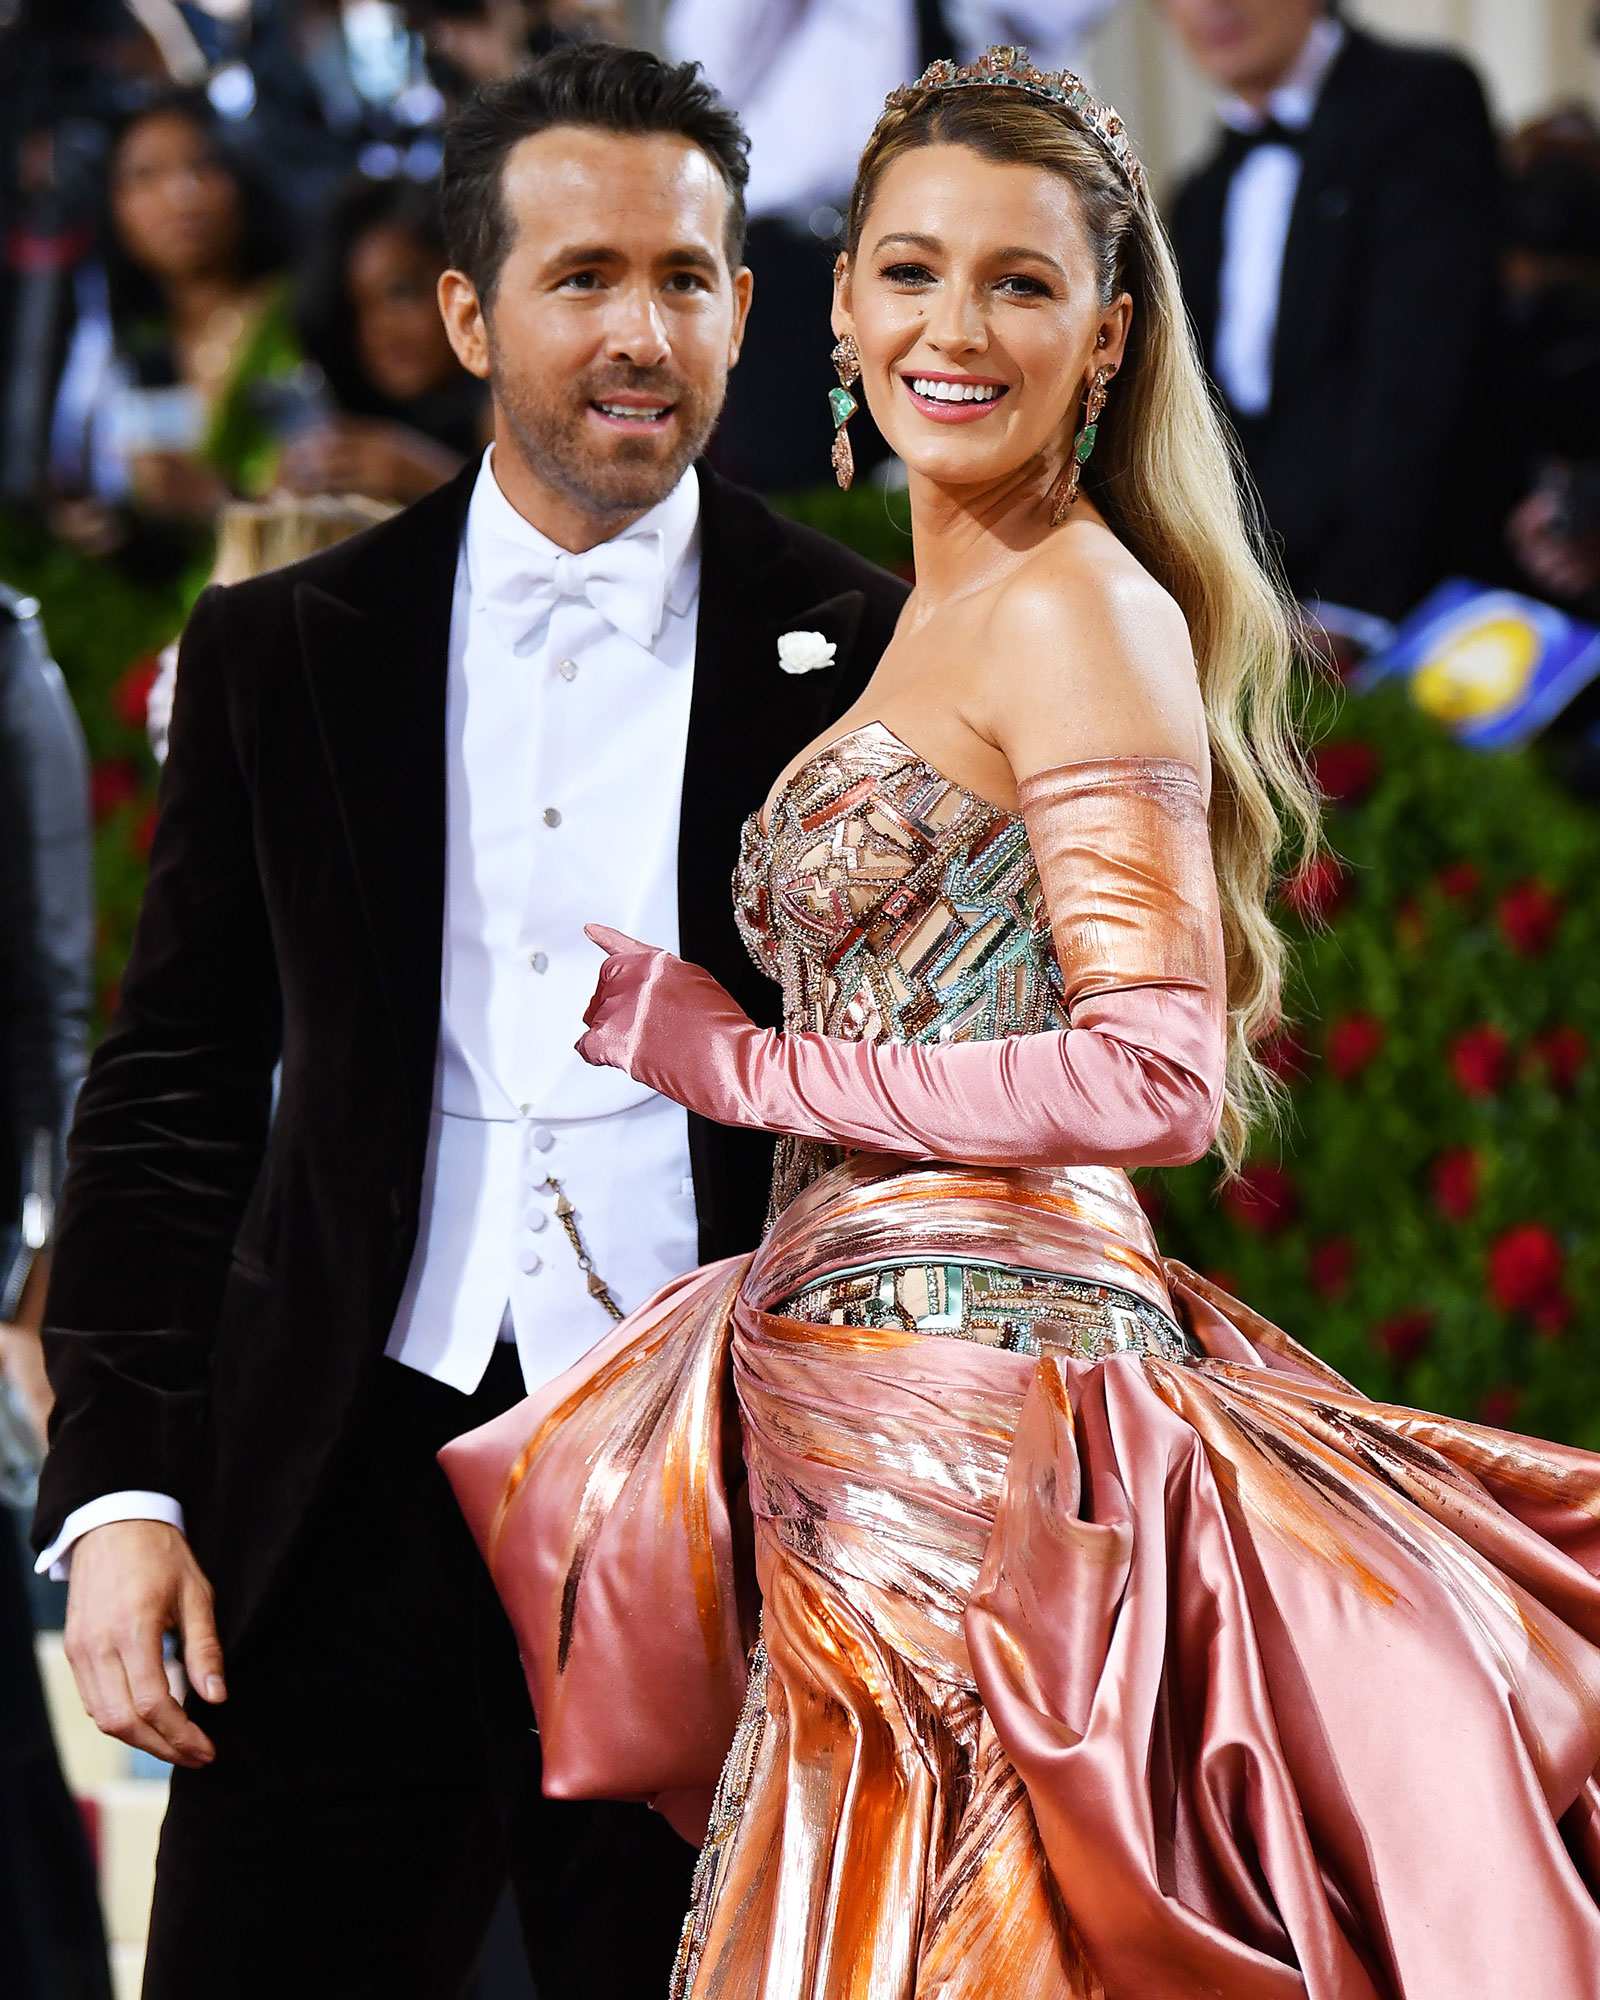 Blake Lively, Ryan Reynolds Are 'Thrilled' With 4th Child's Arrival